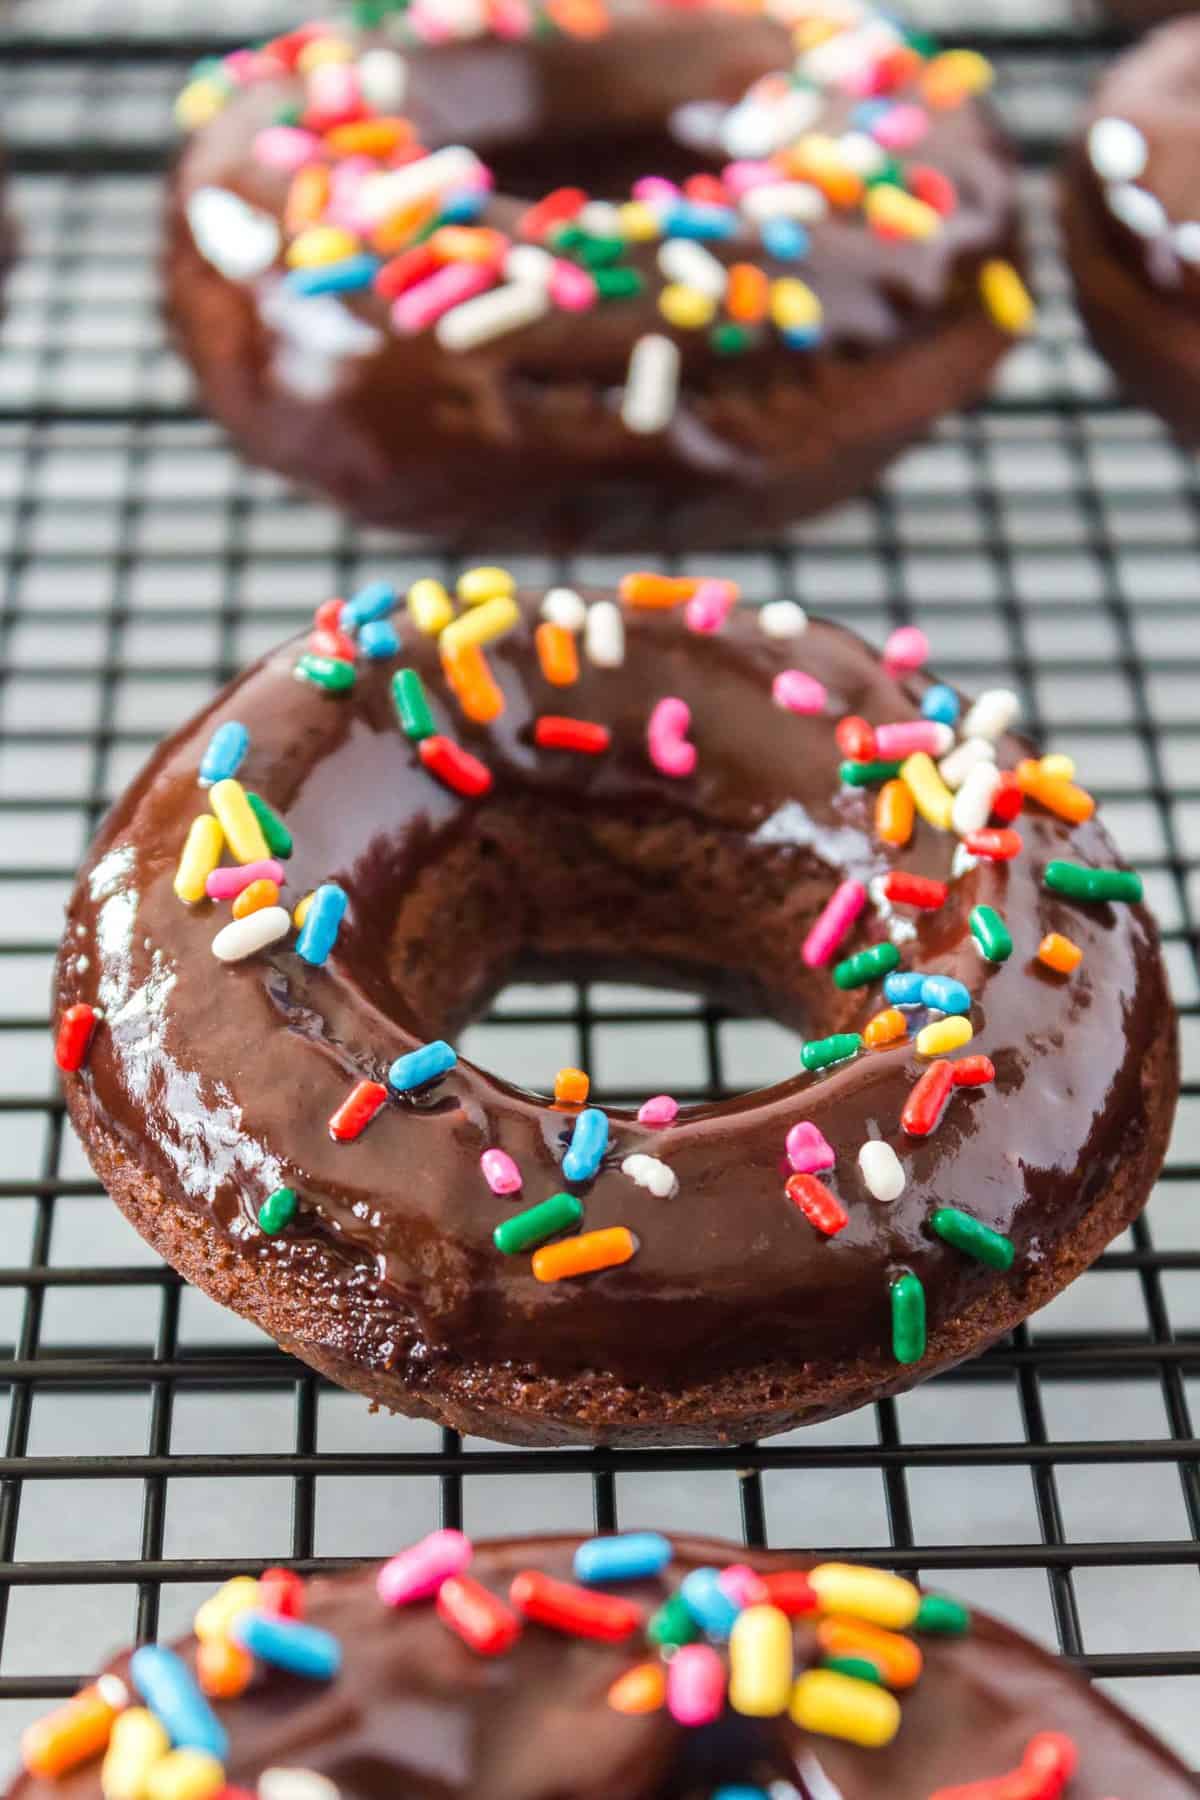 Chocolate donut with frosting on a cooling rack.